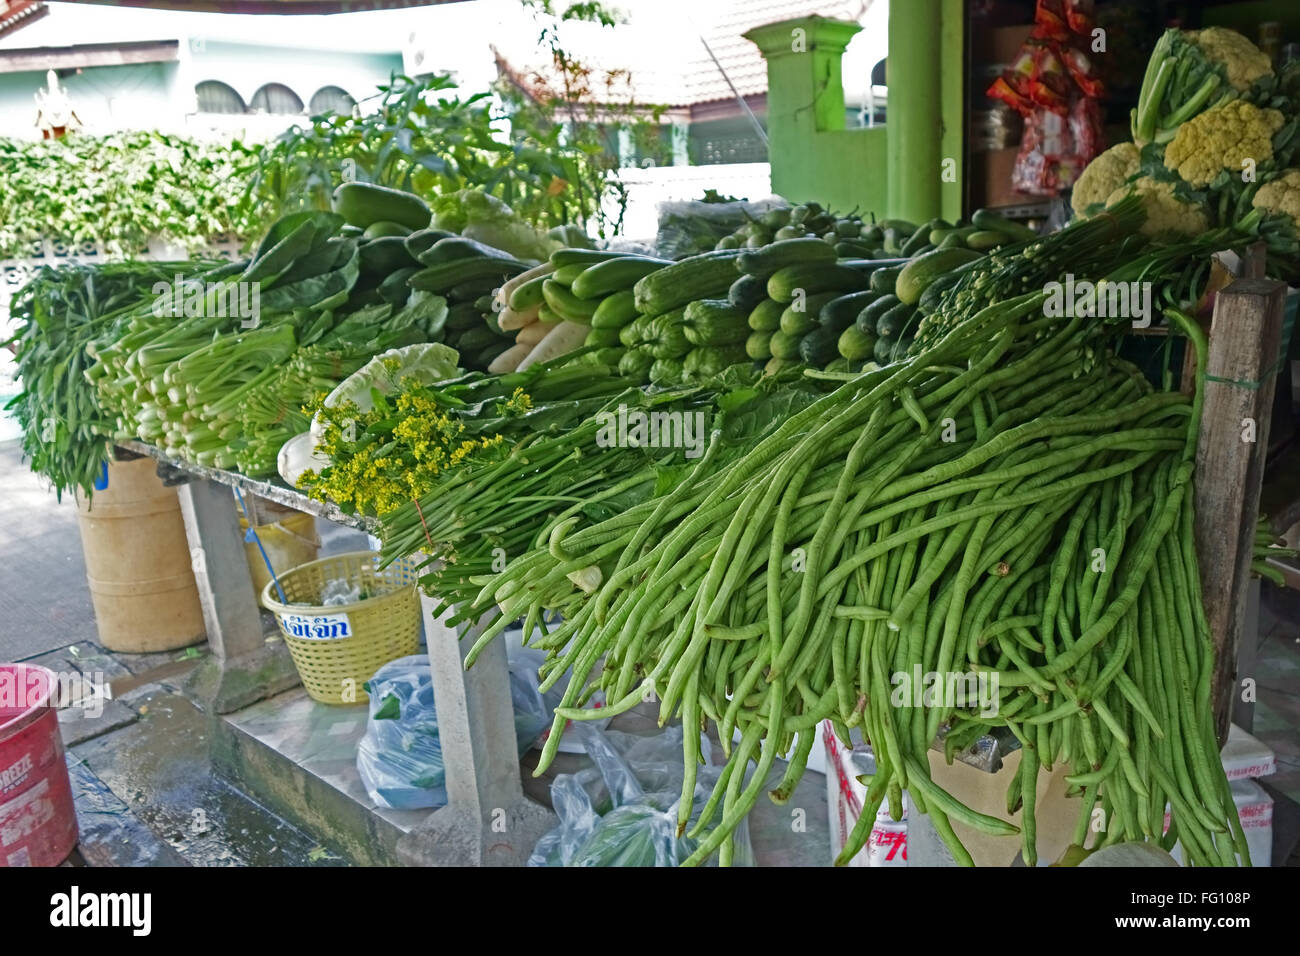 Yardlong beans, bitter melon, cauliflower and other vegetables on a vegetable stall in Bangkok, Thailand Stock Photo